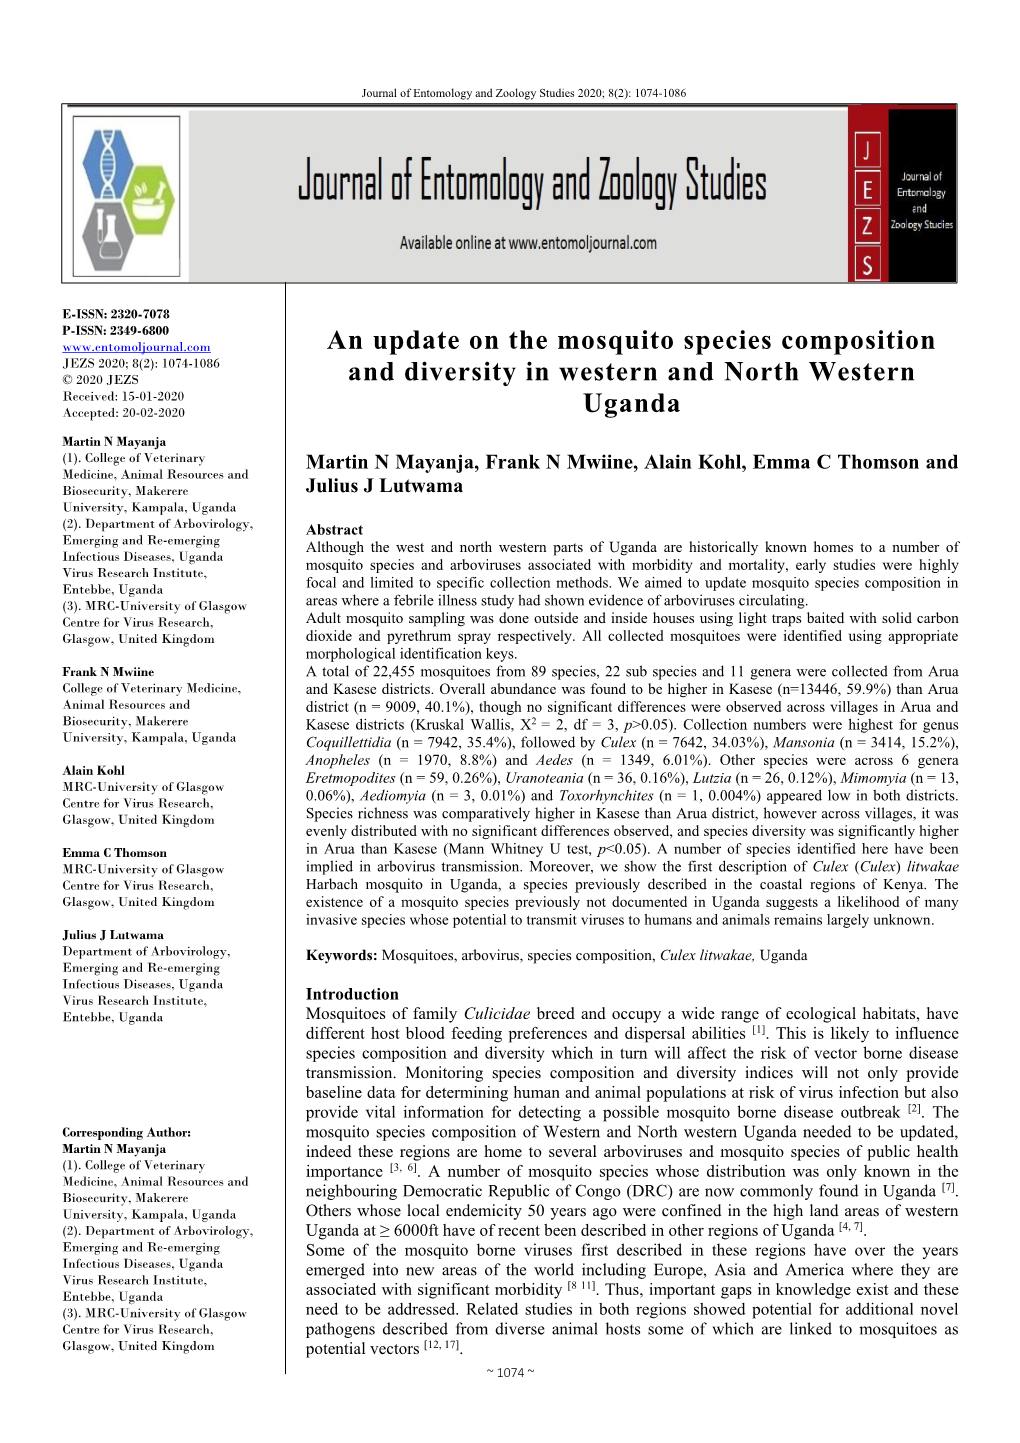 An Update on the Mosquito Species Composition and Diversity In